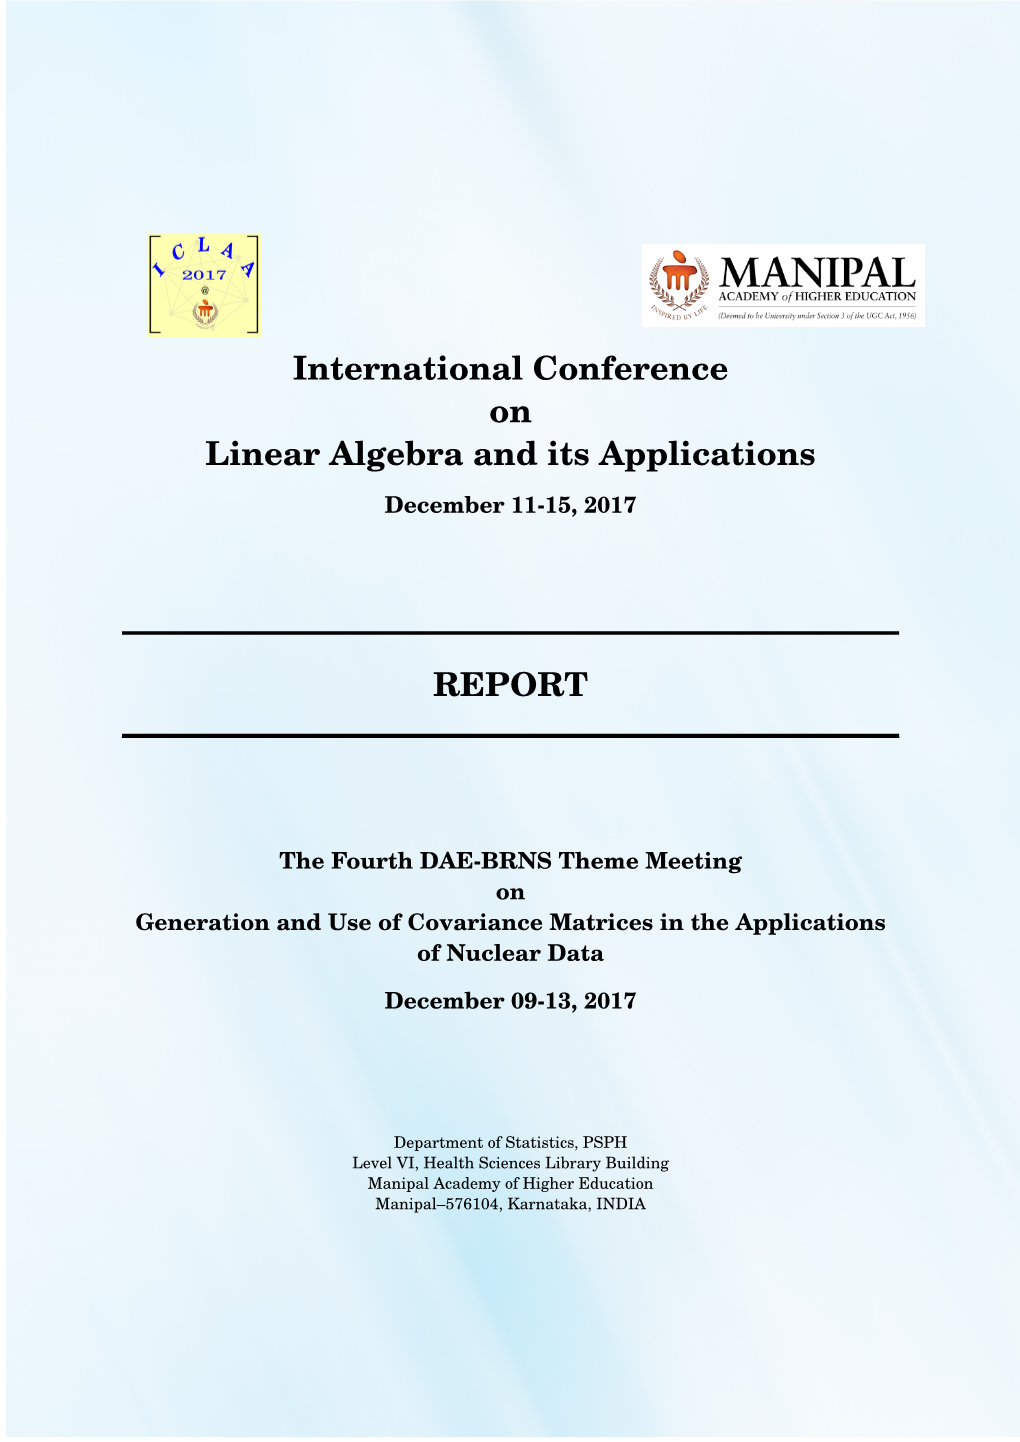 International Conference on Linear Algebra and Its Applications REPORT